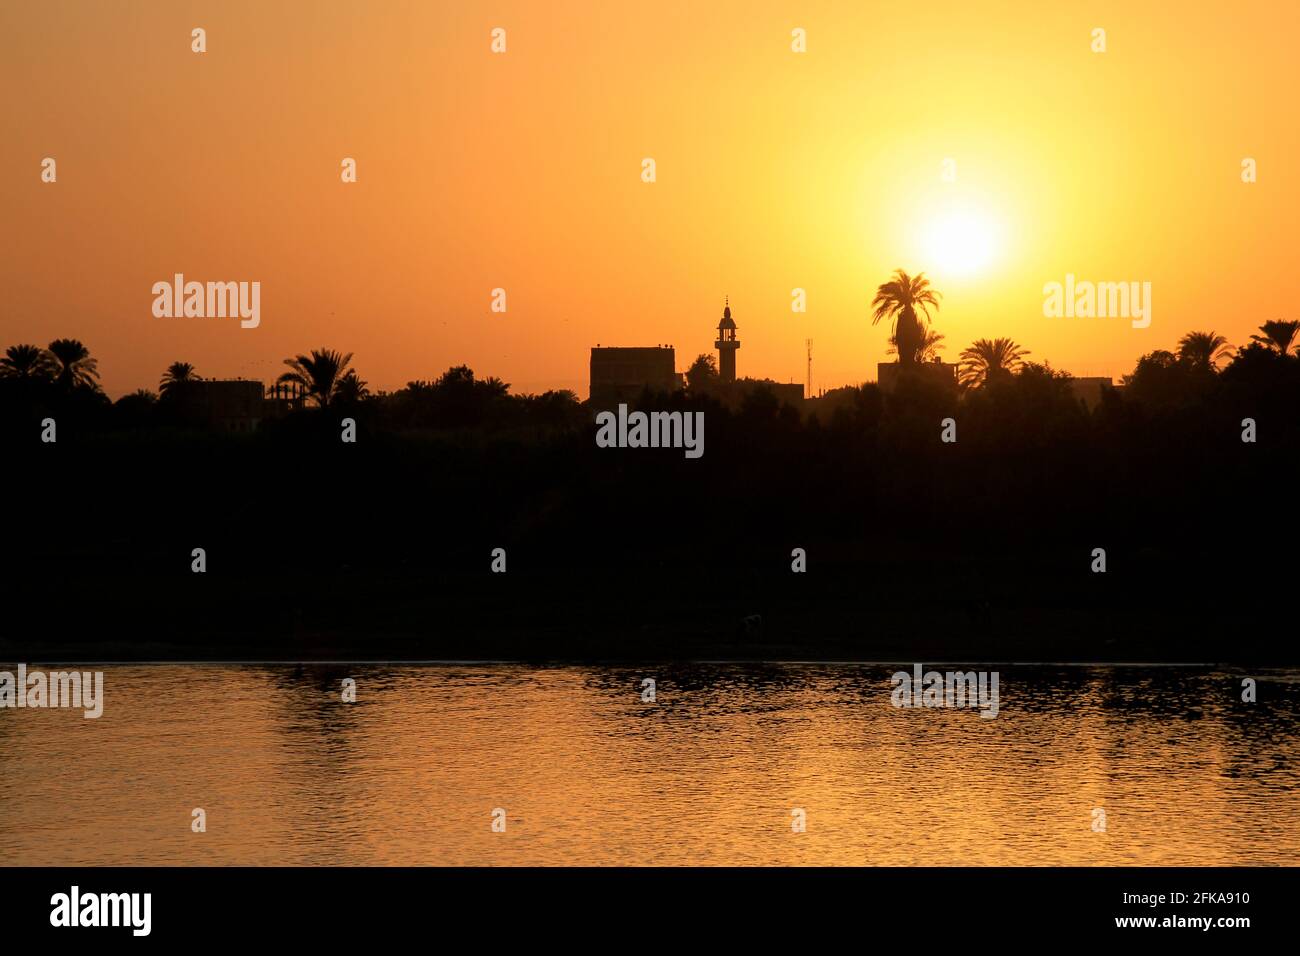 Silhouette of palm trees and buildings along Nile River against orange sunset, Egypt Stock Photo